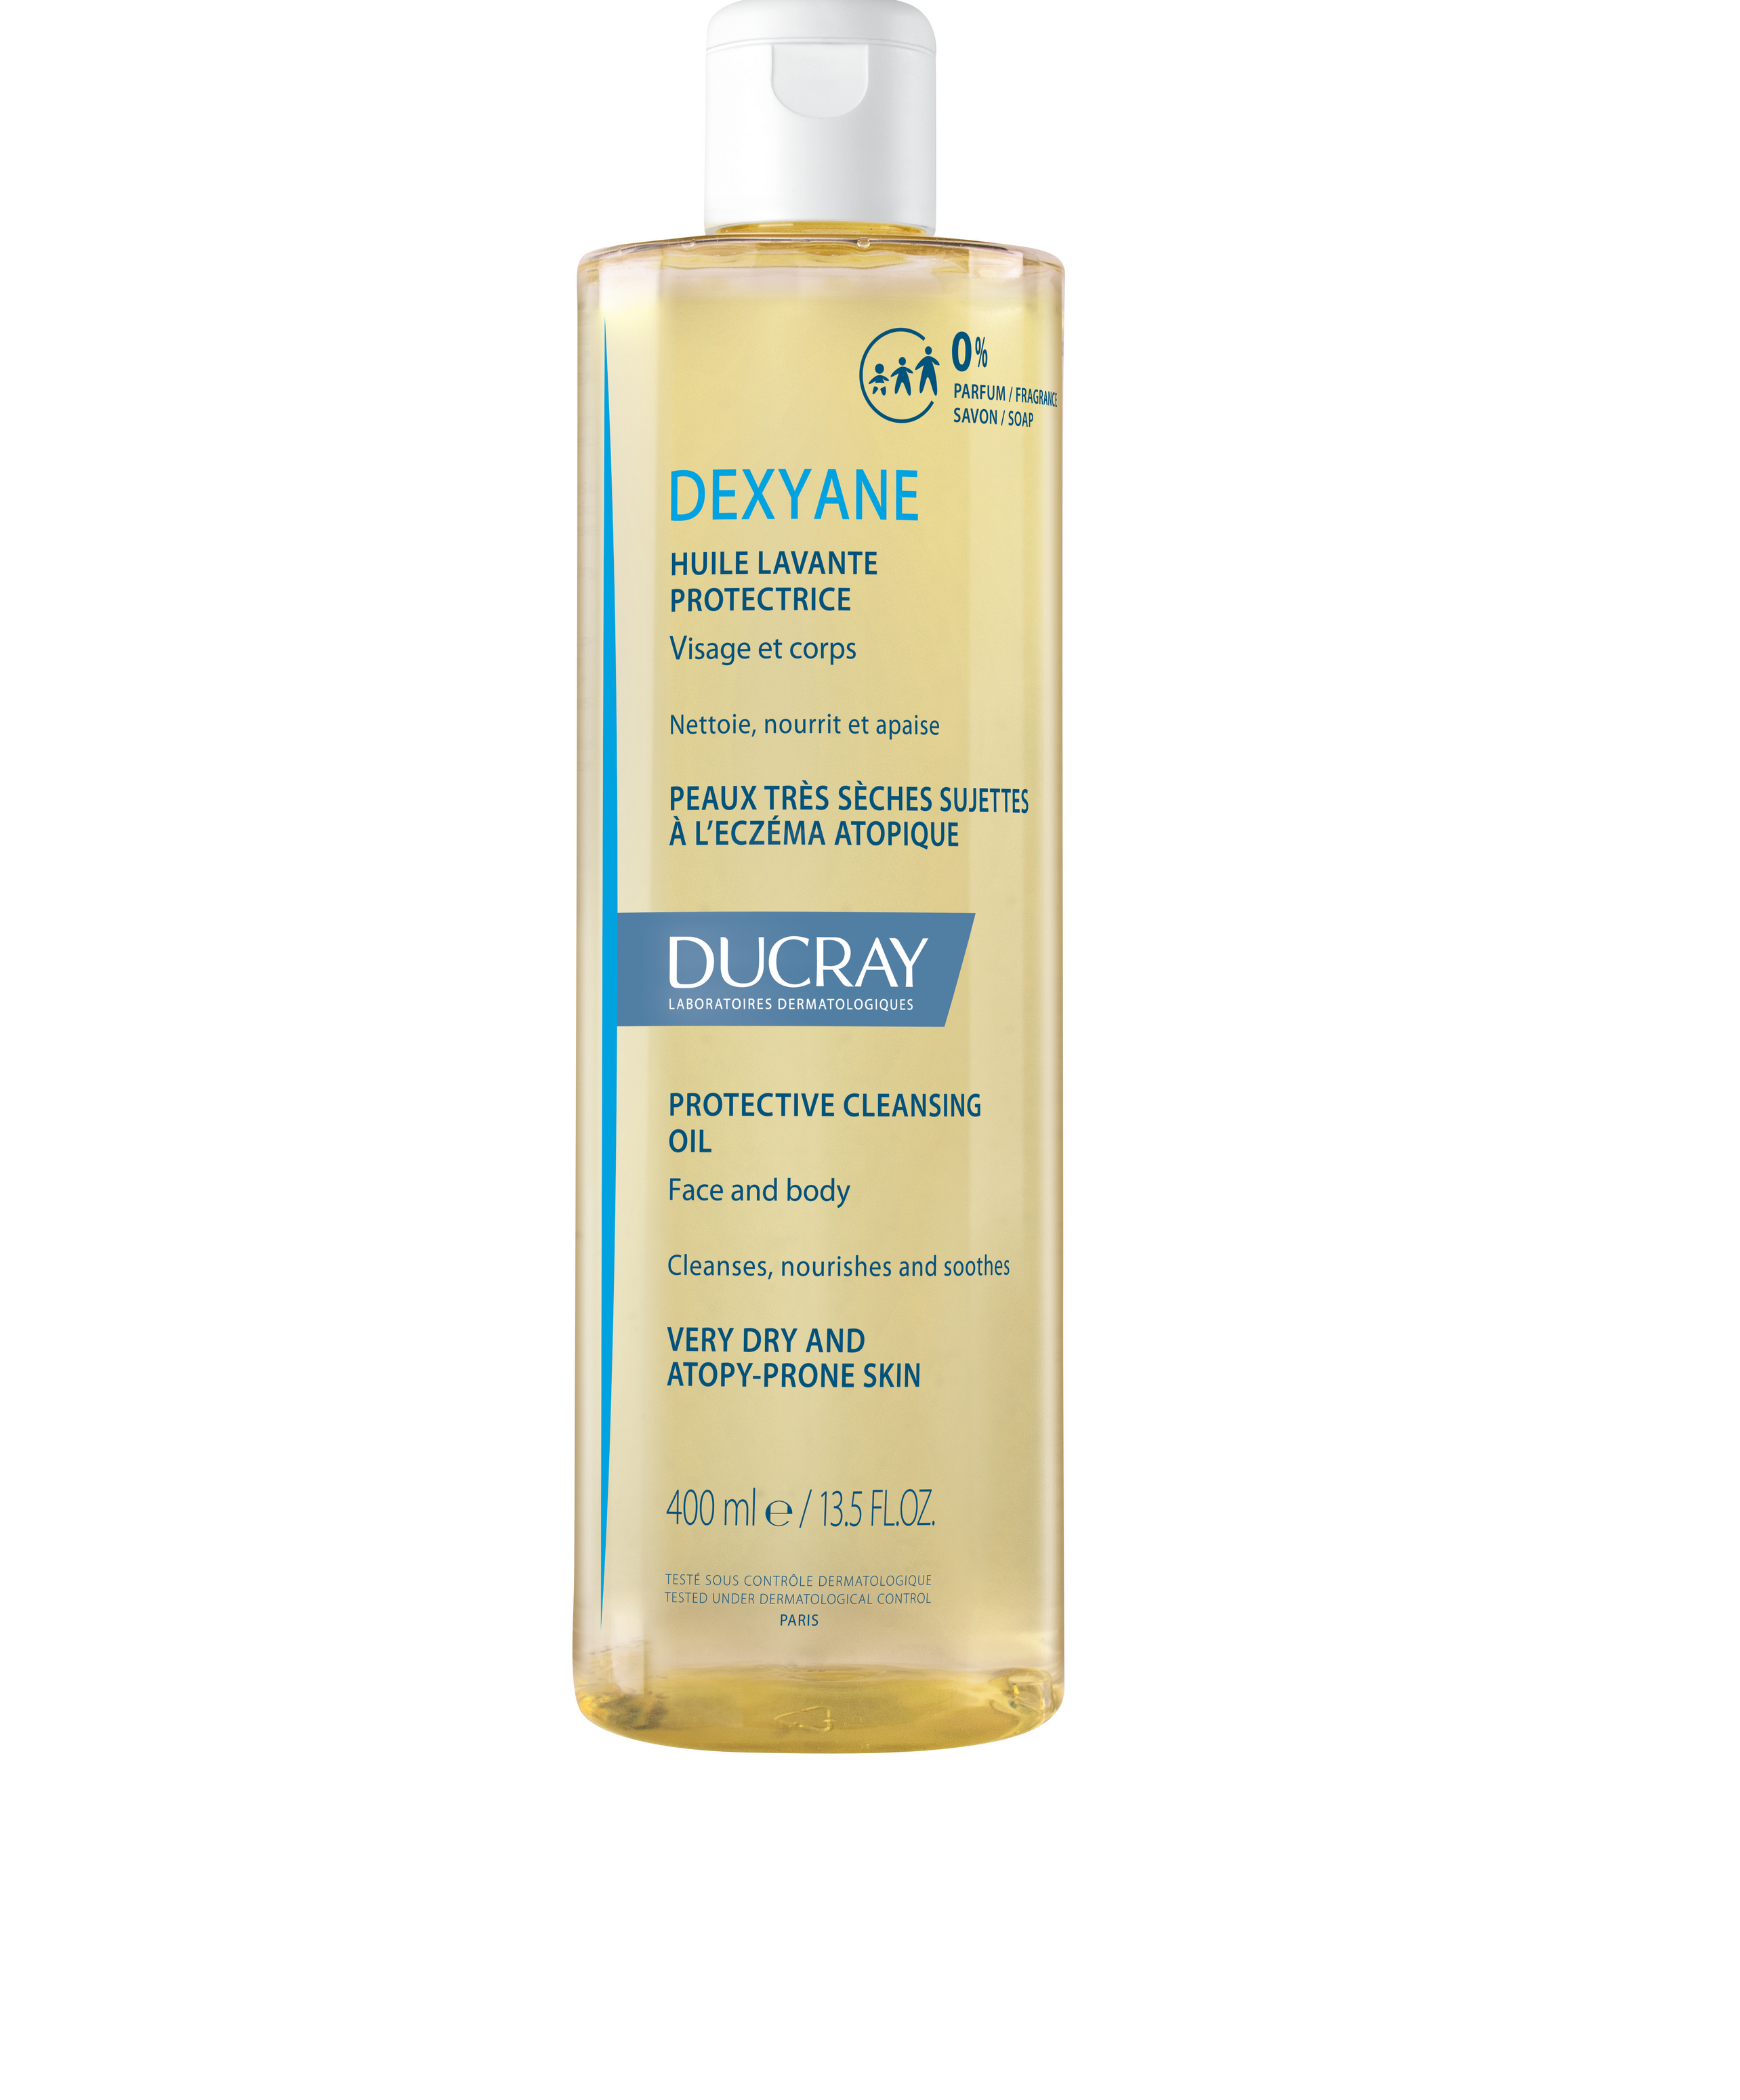 DU_DEXYANE_Protective-cleansing-oil_Front_400ml_3282770203028